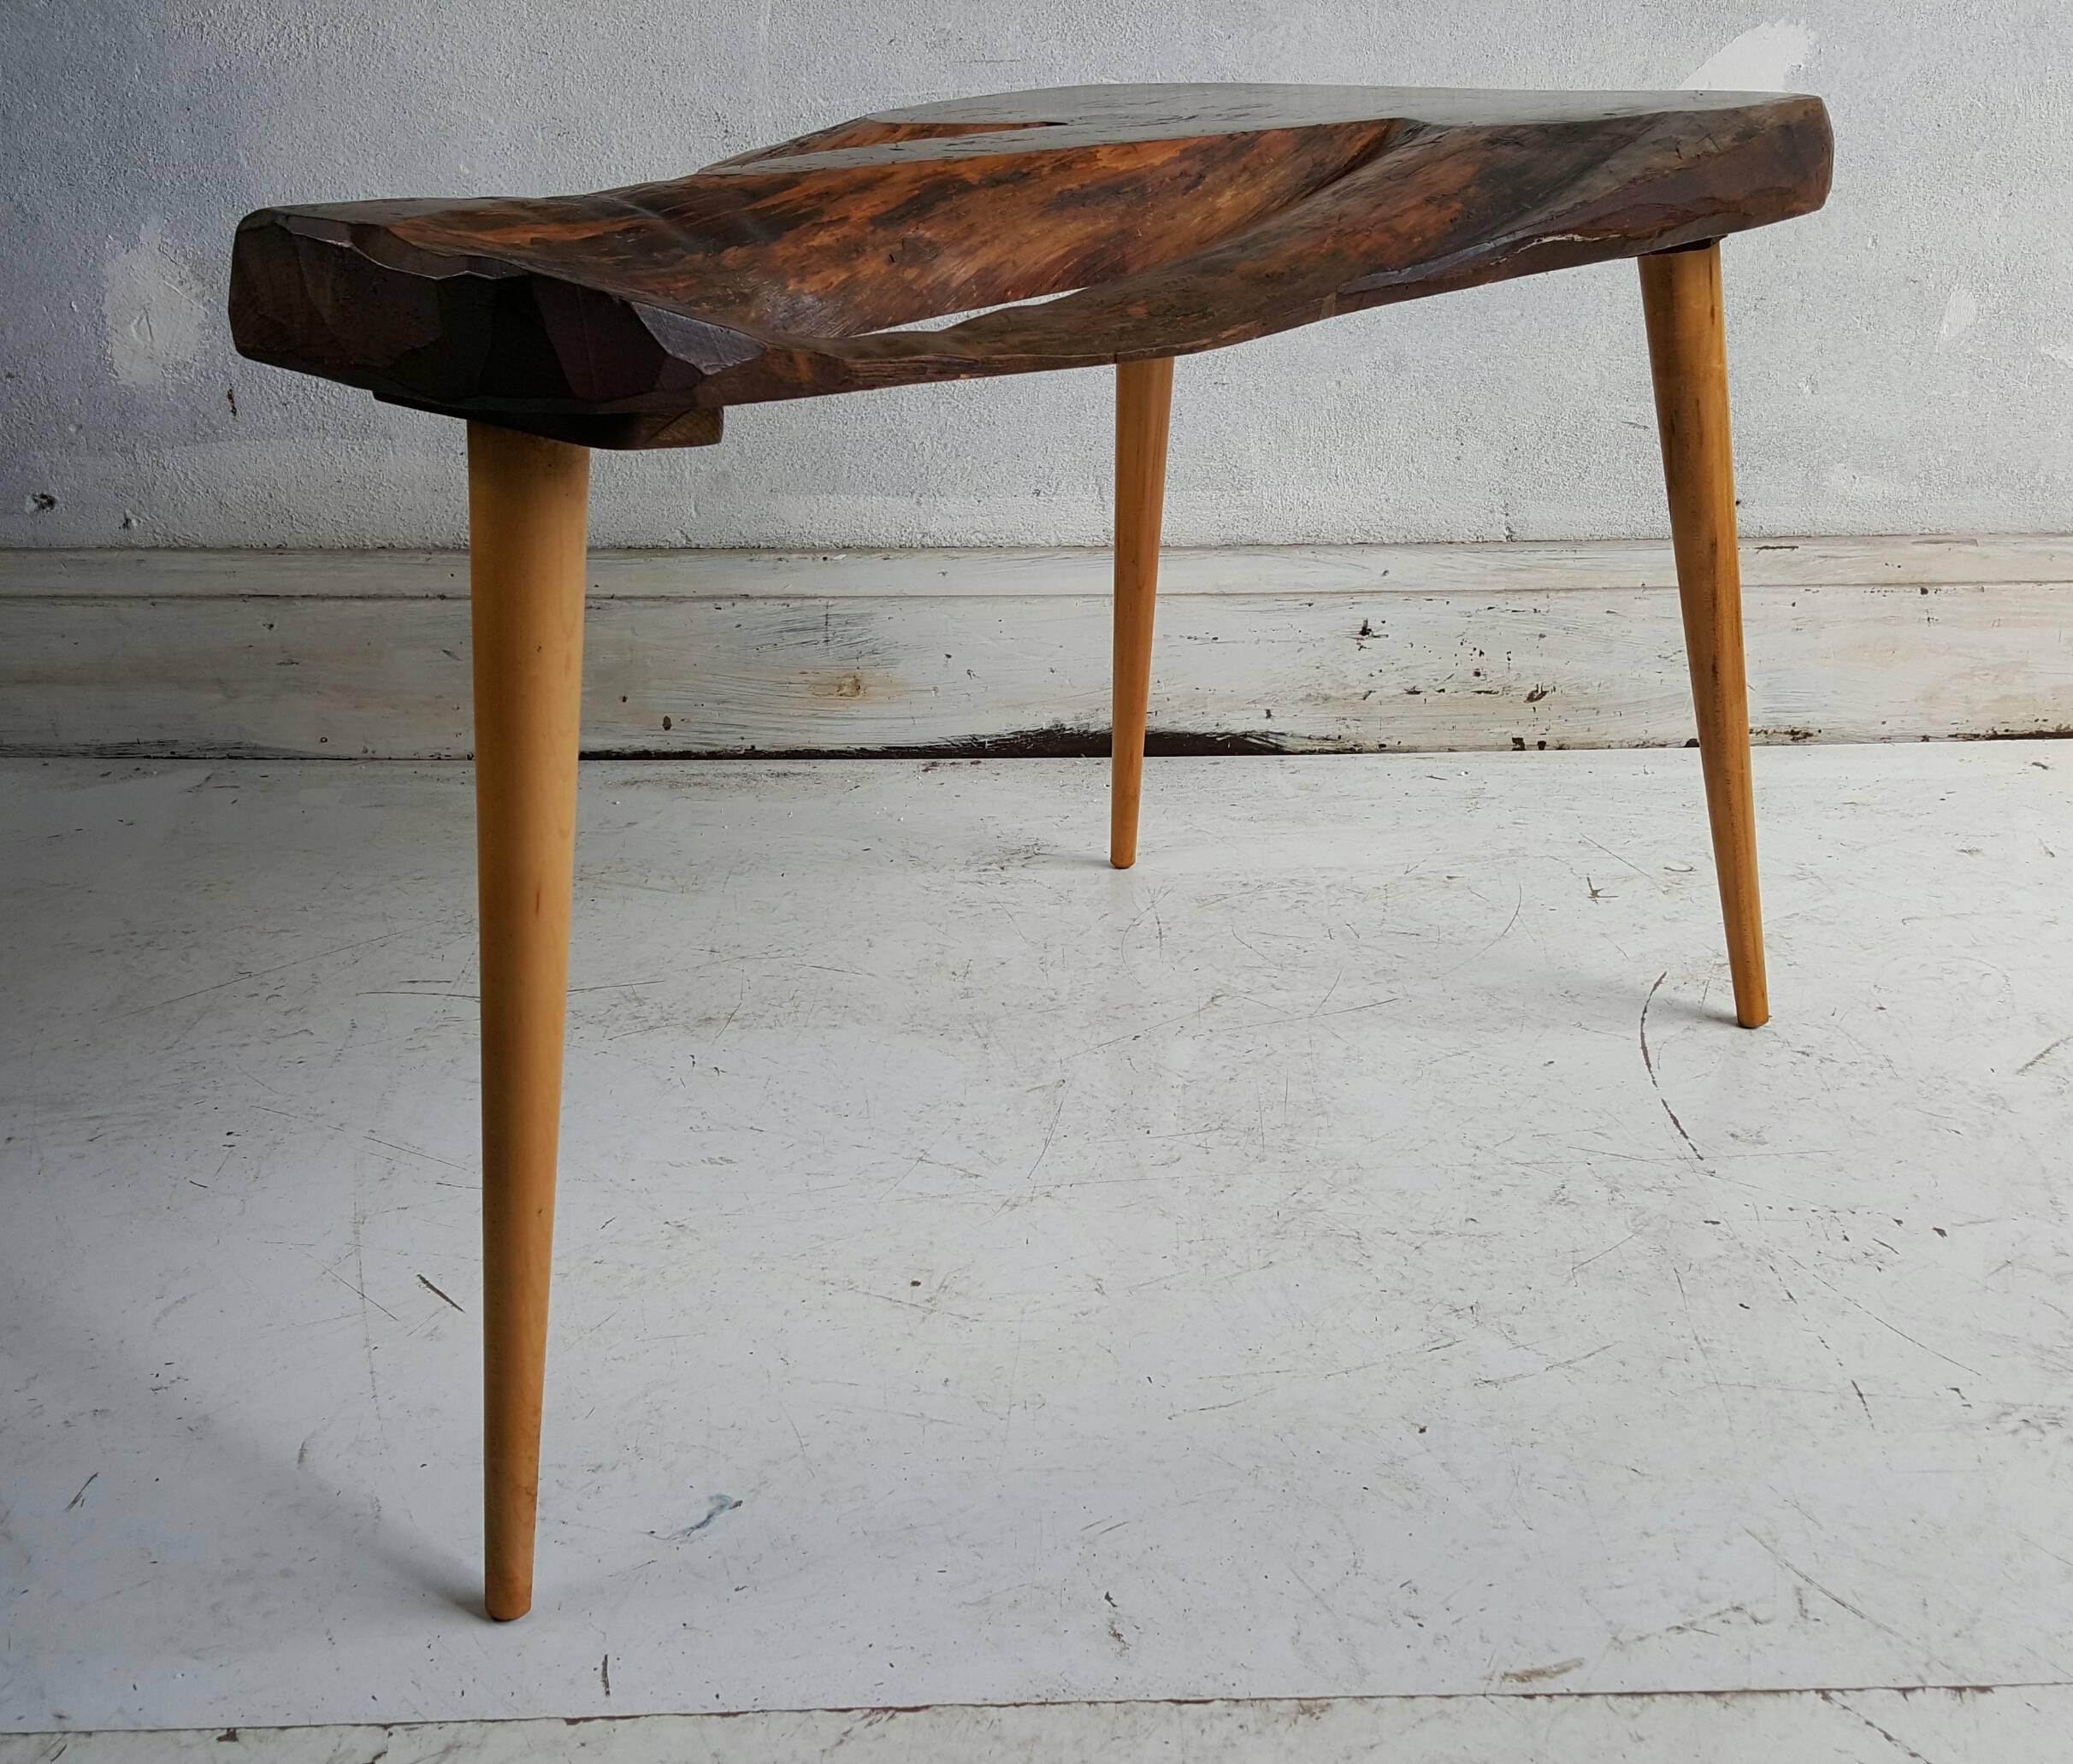 Modernist bench made free edge occasional table. Nakashima meets McCobb. Wonderful solid walnut slab, Classic Mid-Century blond birch tapered legs.